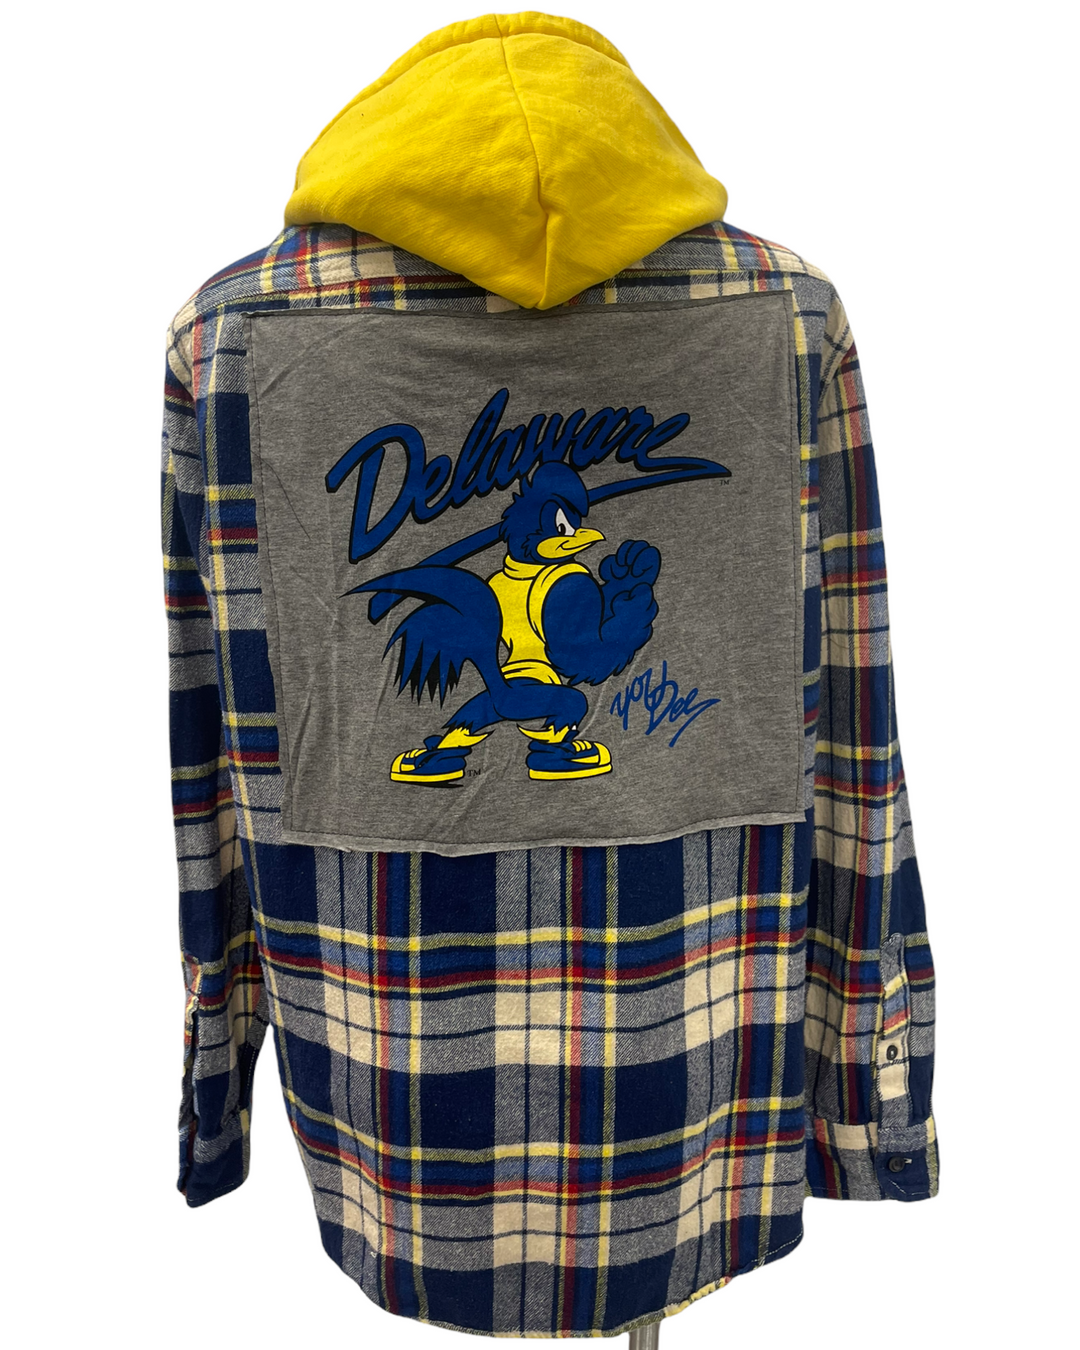 Delaware Patched Flannel